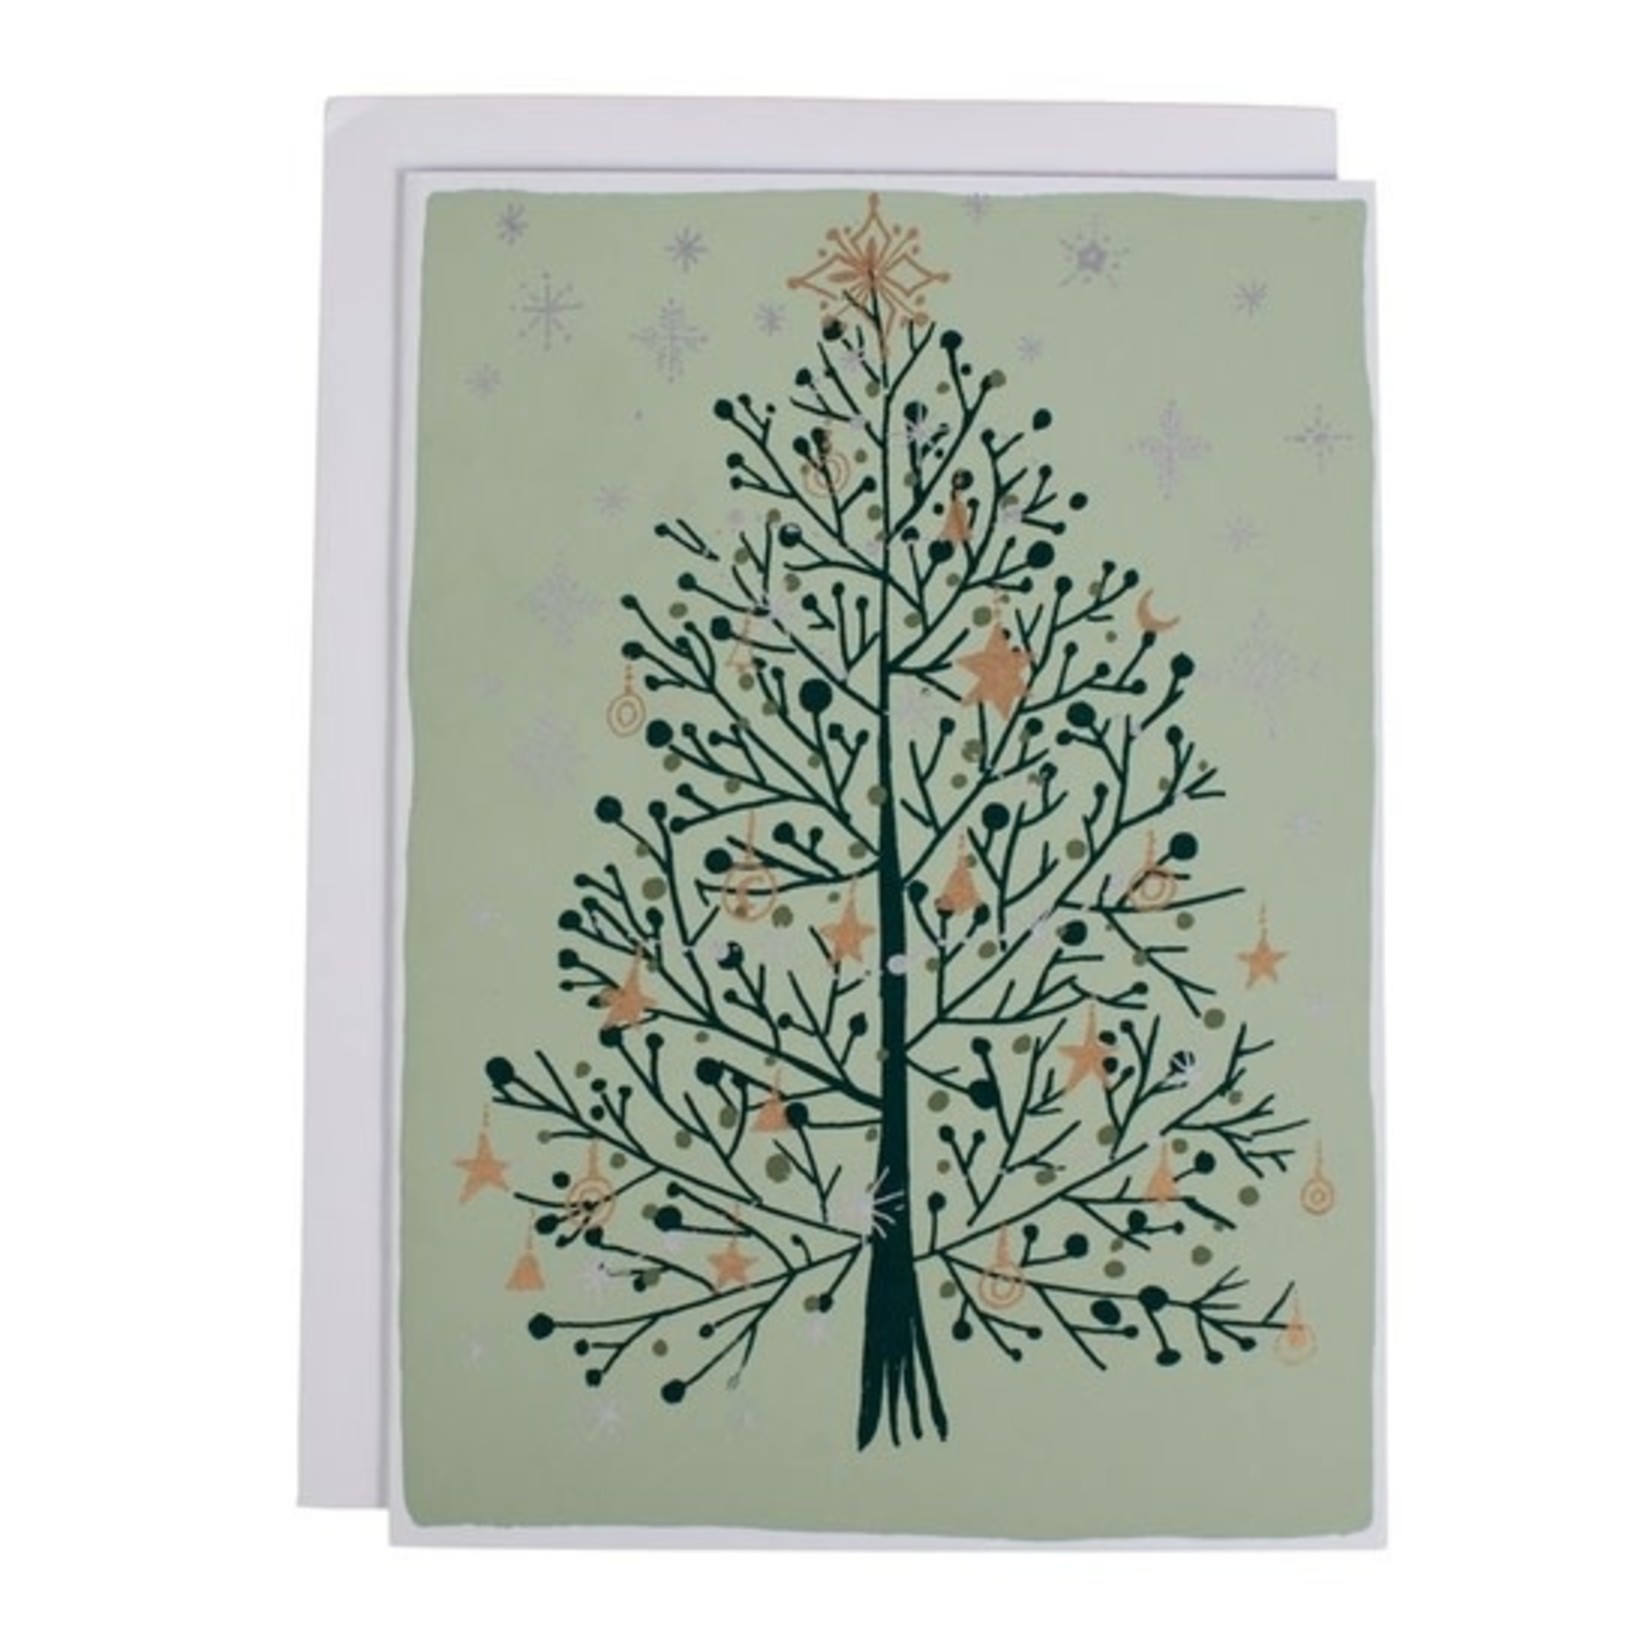 Ten Thousand Villages USA Sparkling Tree Holiday Card, India